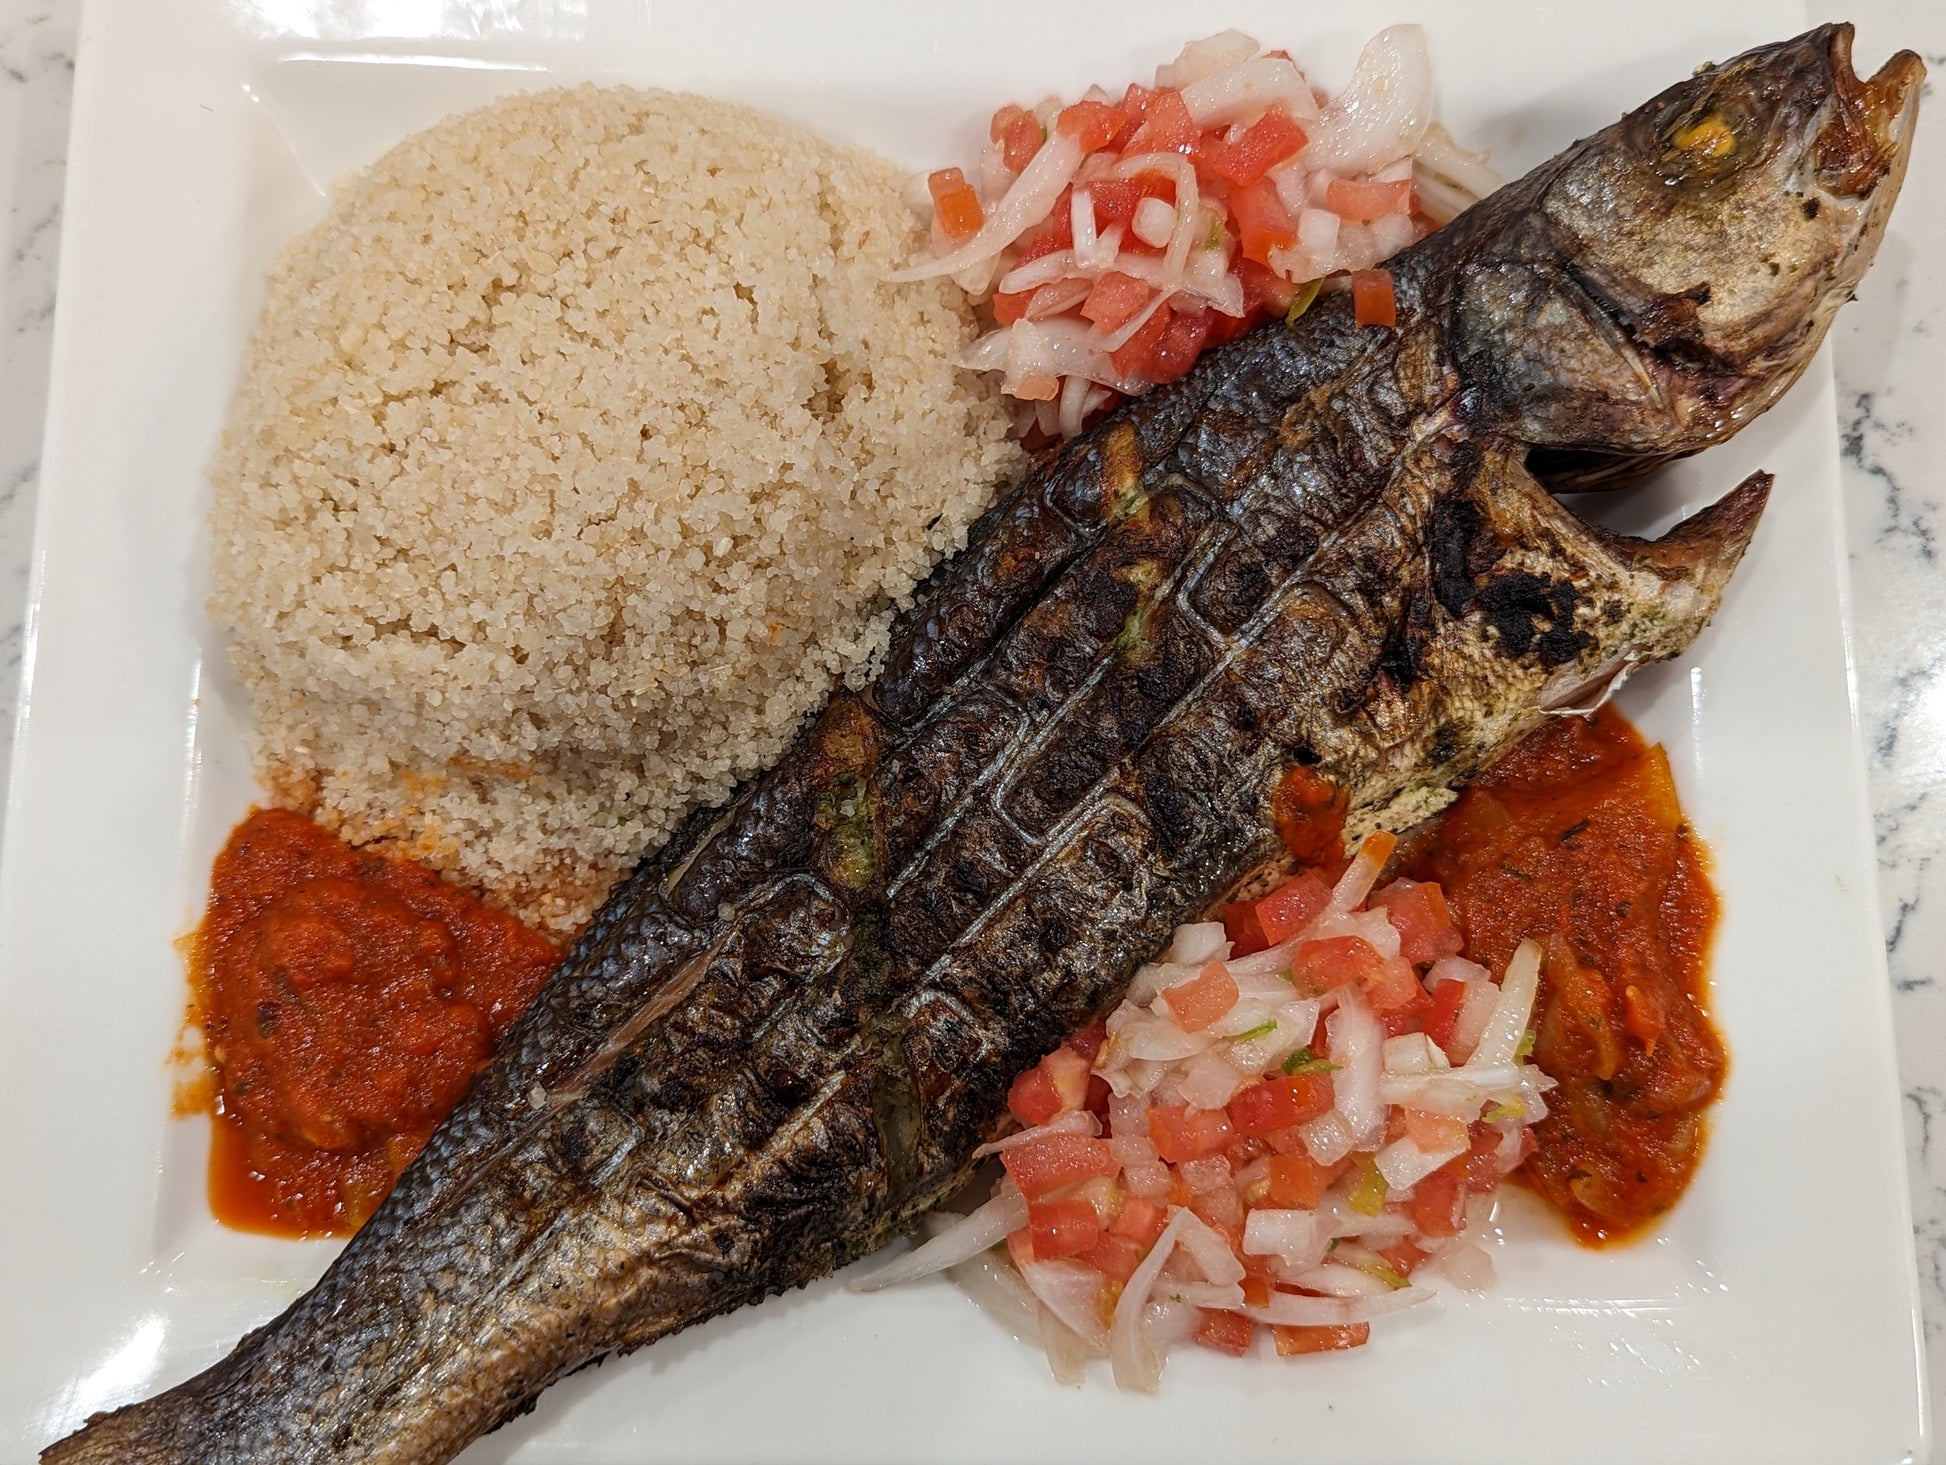 poisson grille (grilled fish)